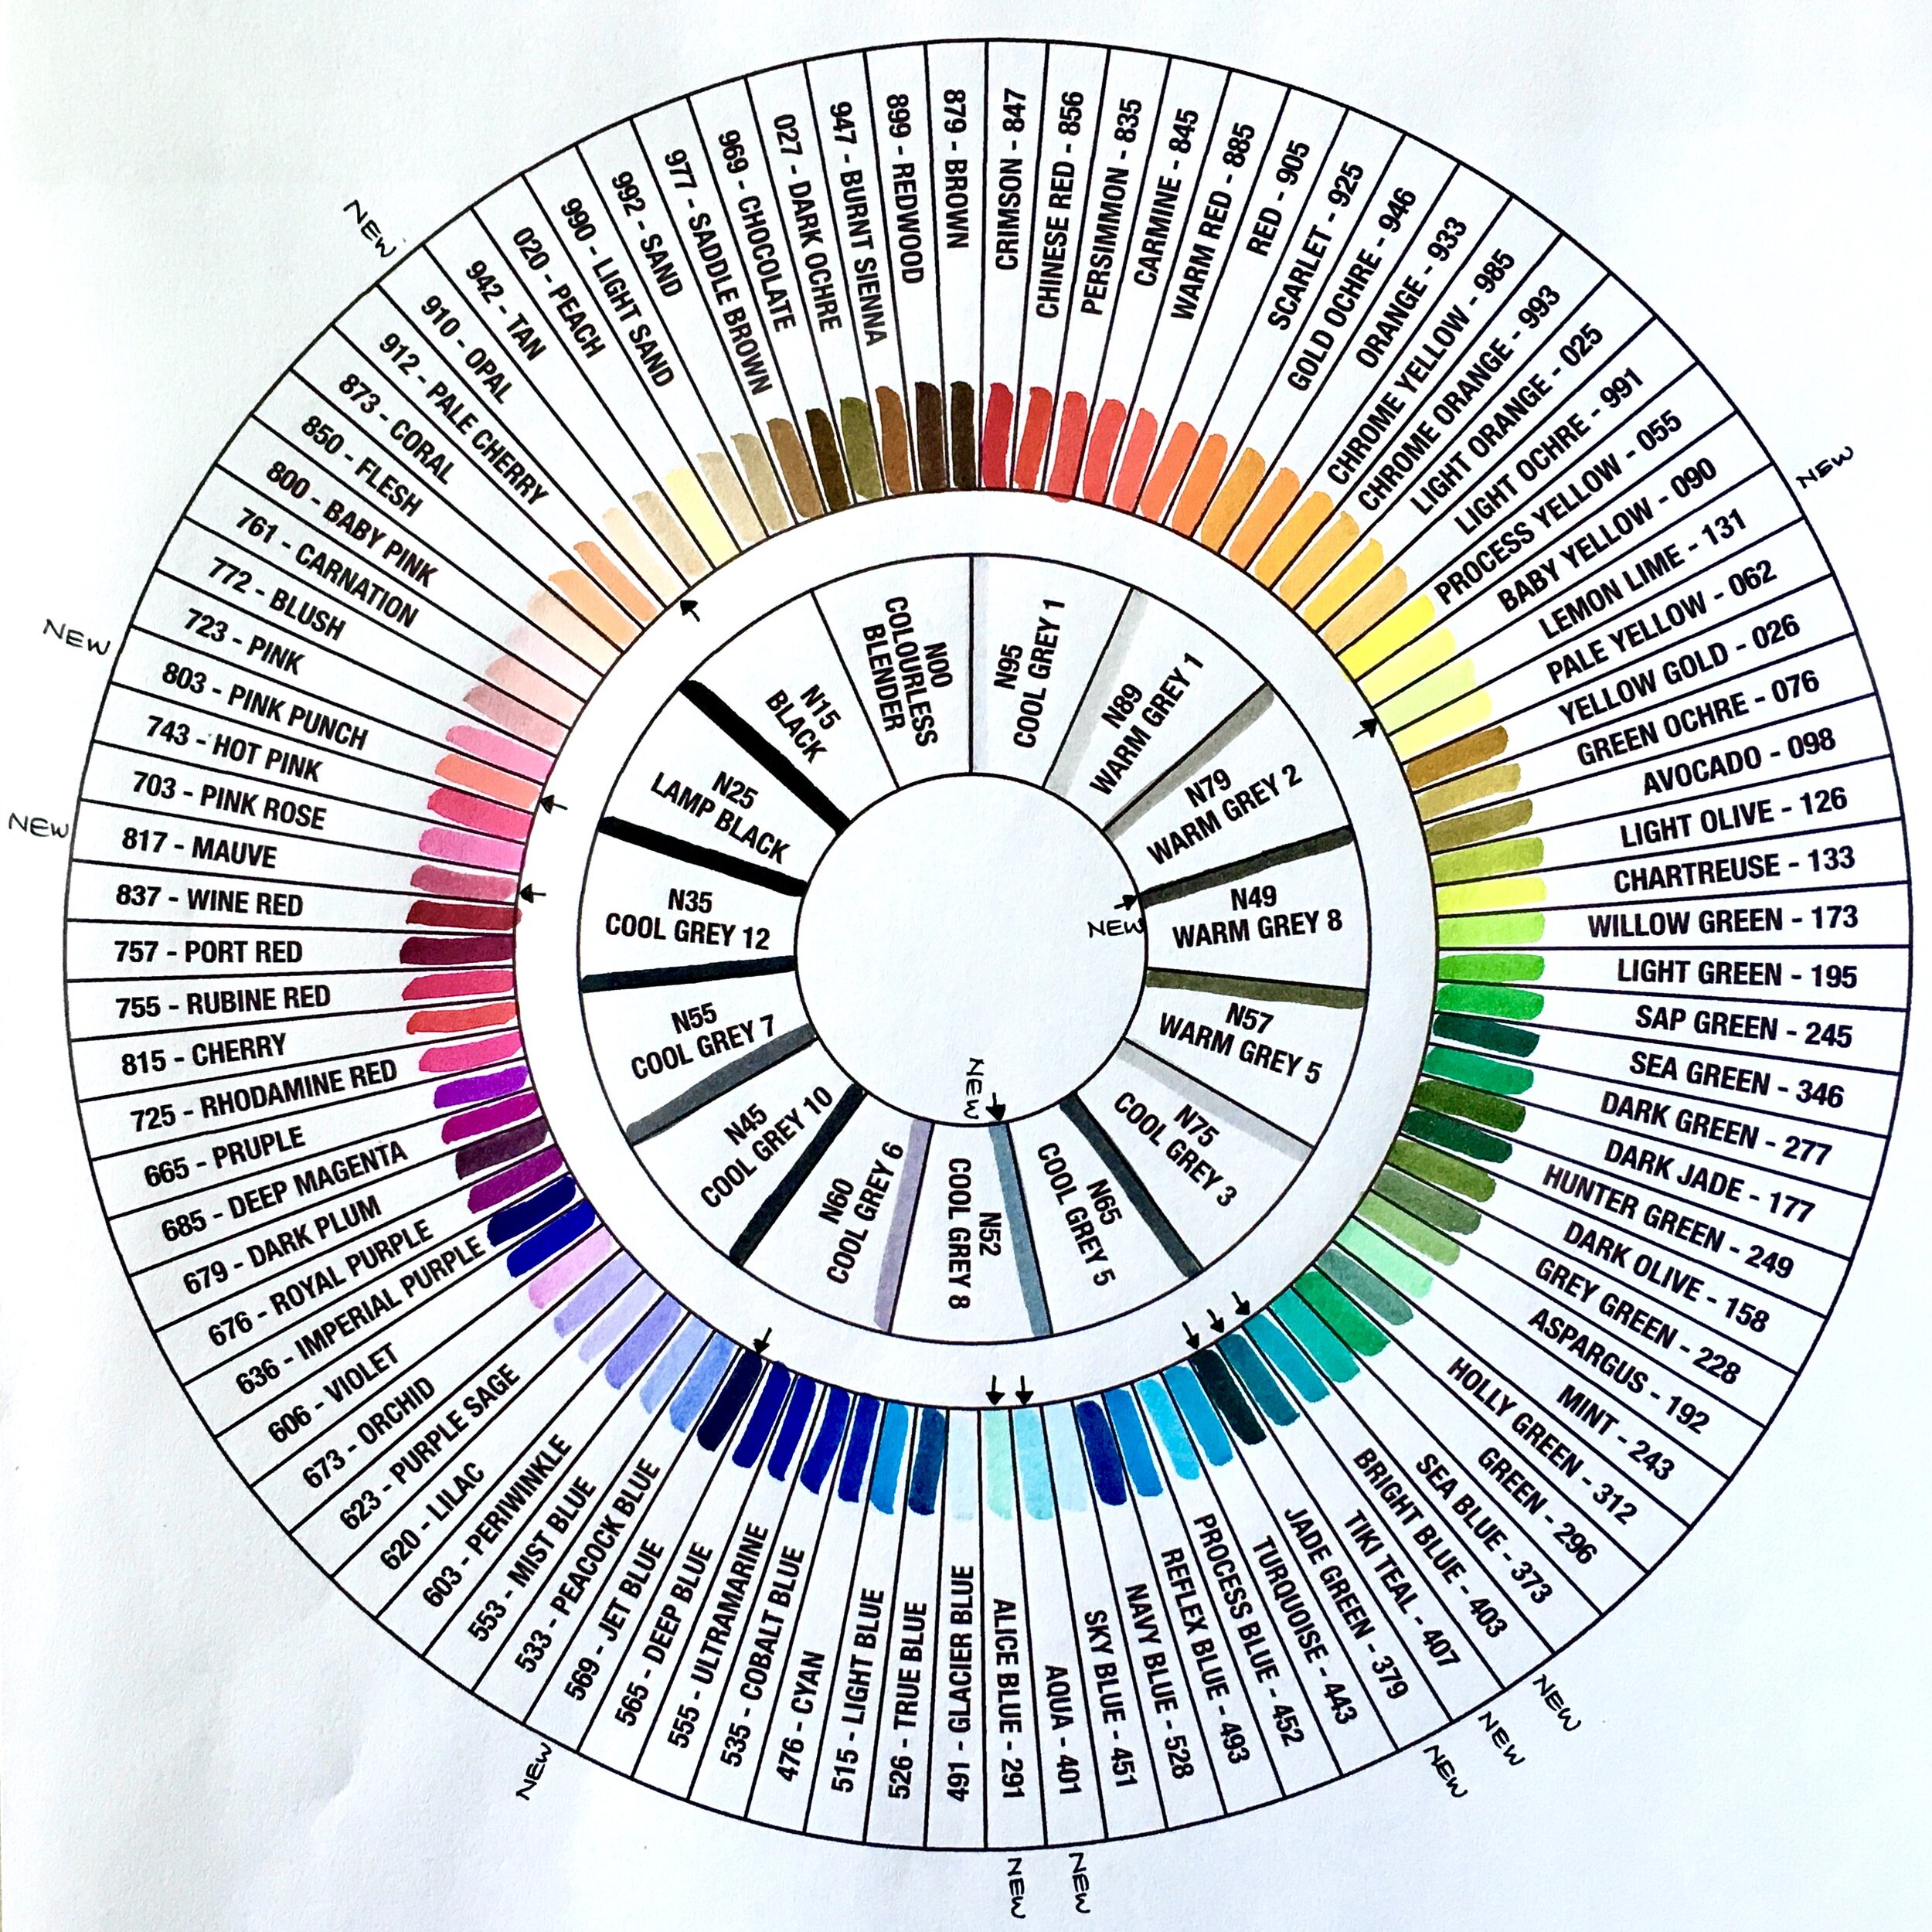 Tombow Brush Pen Color Selector and Color Tracker – Paper Crafting